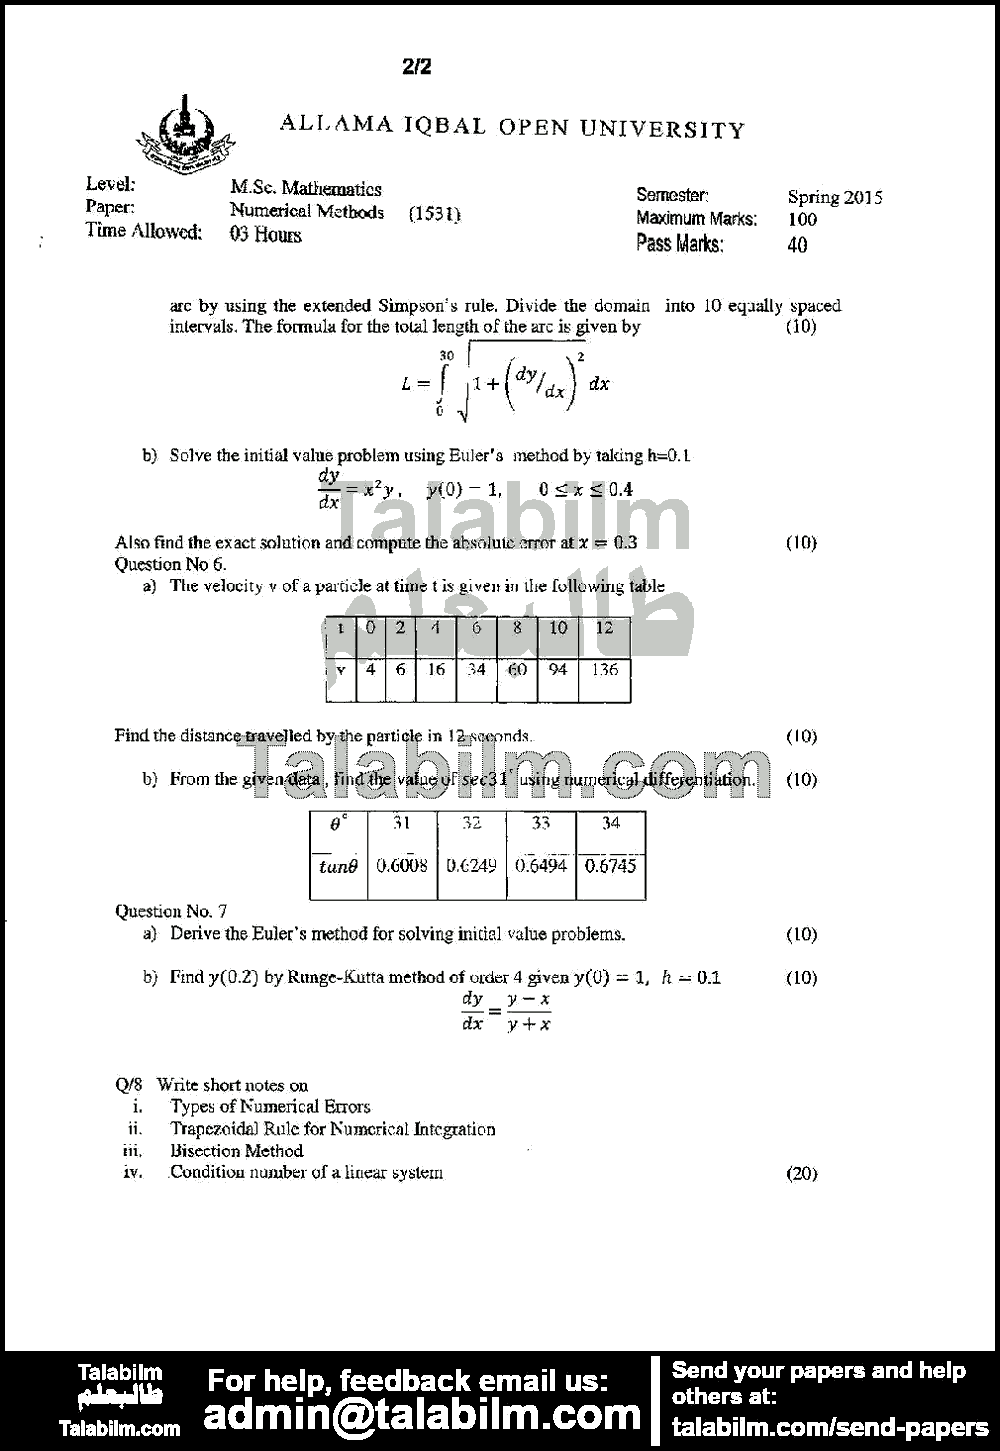 Numerical methods 1531 past paper for Spring 2015 Page No. 2